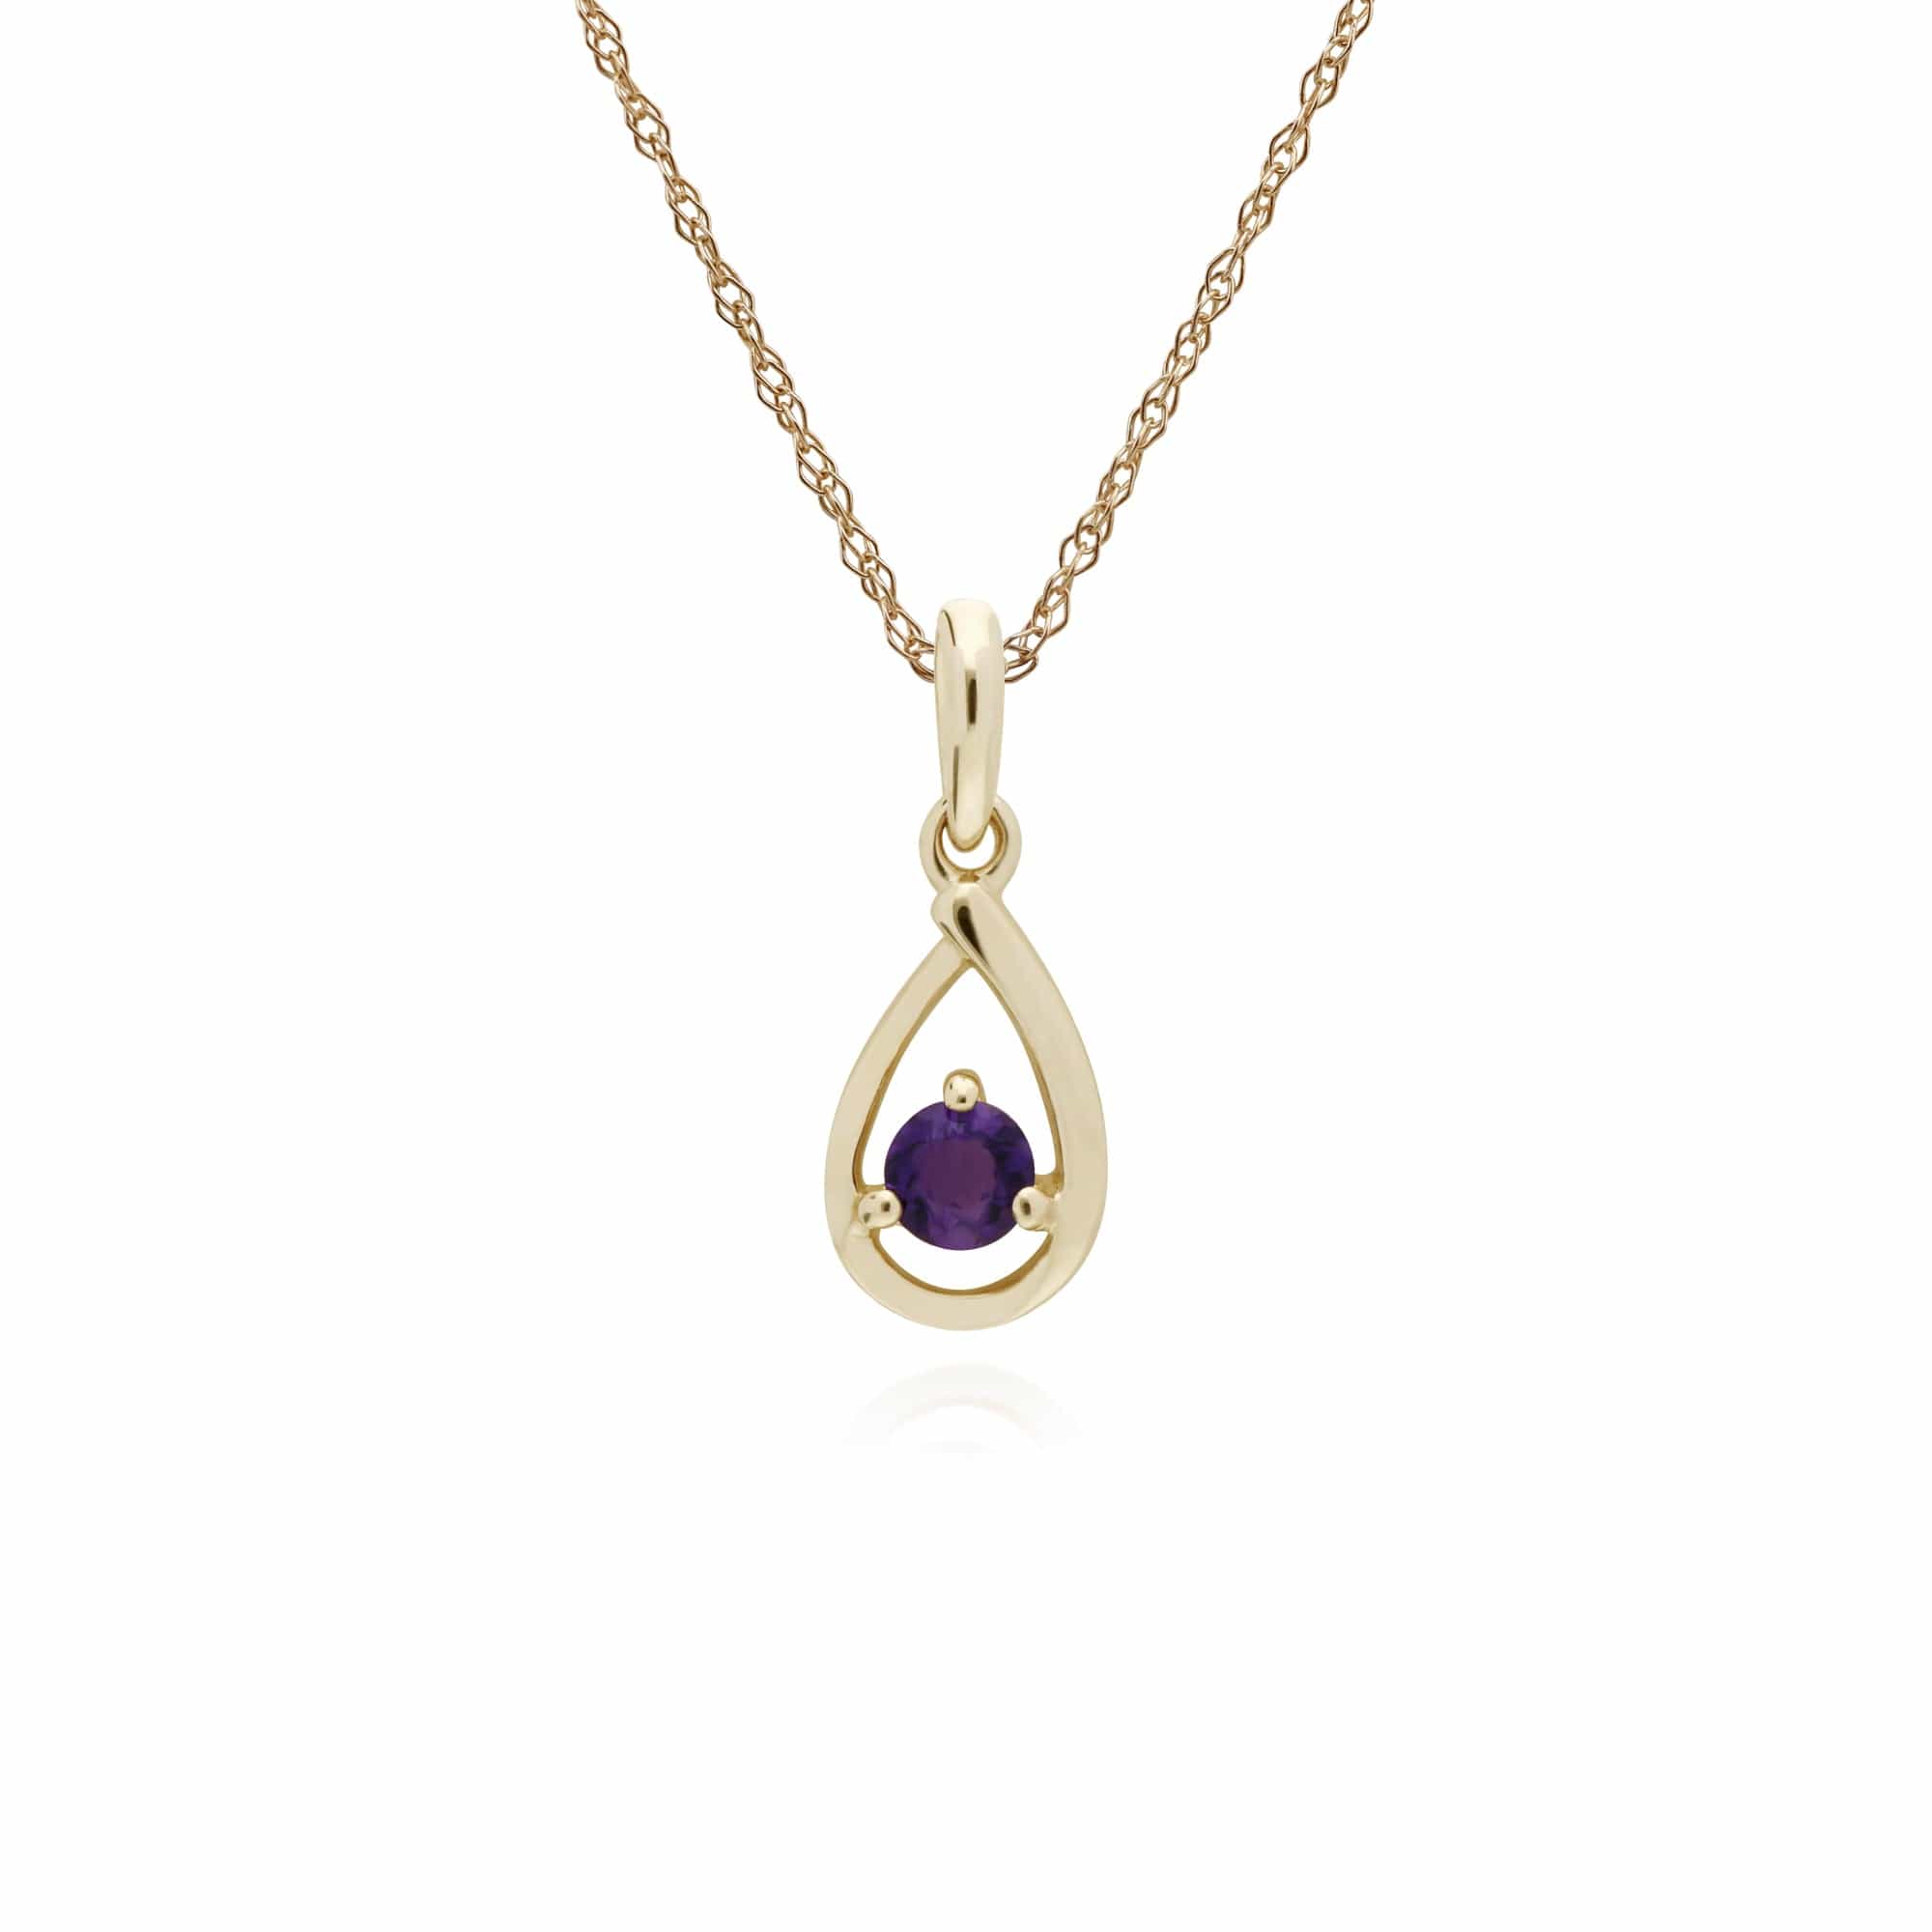 135E1190059-135P1551059 Classic Round Amethyst Single Stone Tear Drop Earrings & Necklace Set in 9ct Yellow Gold 3